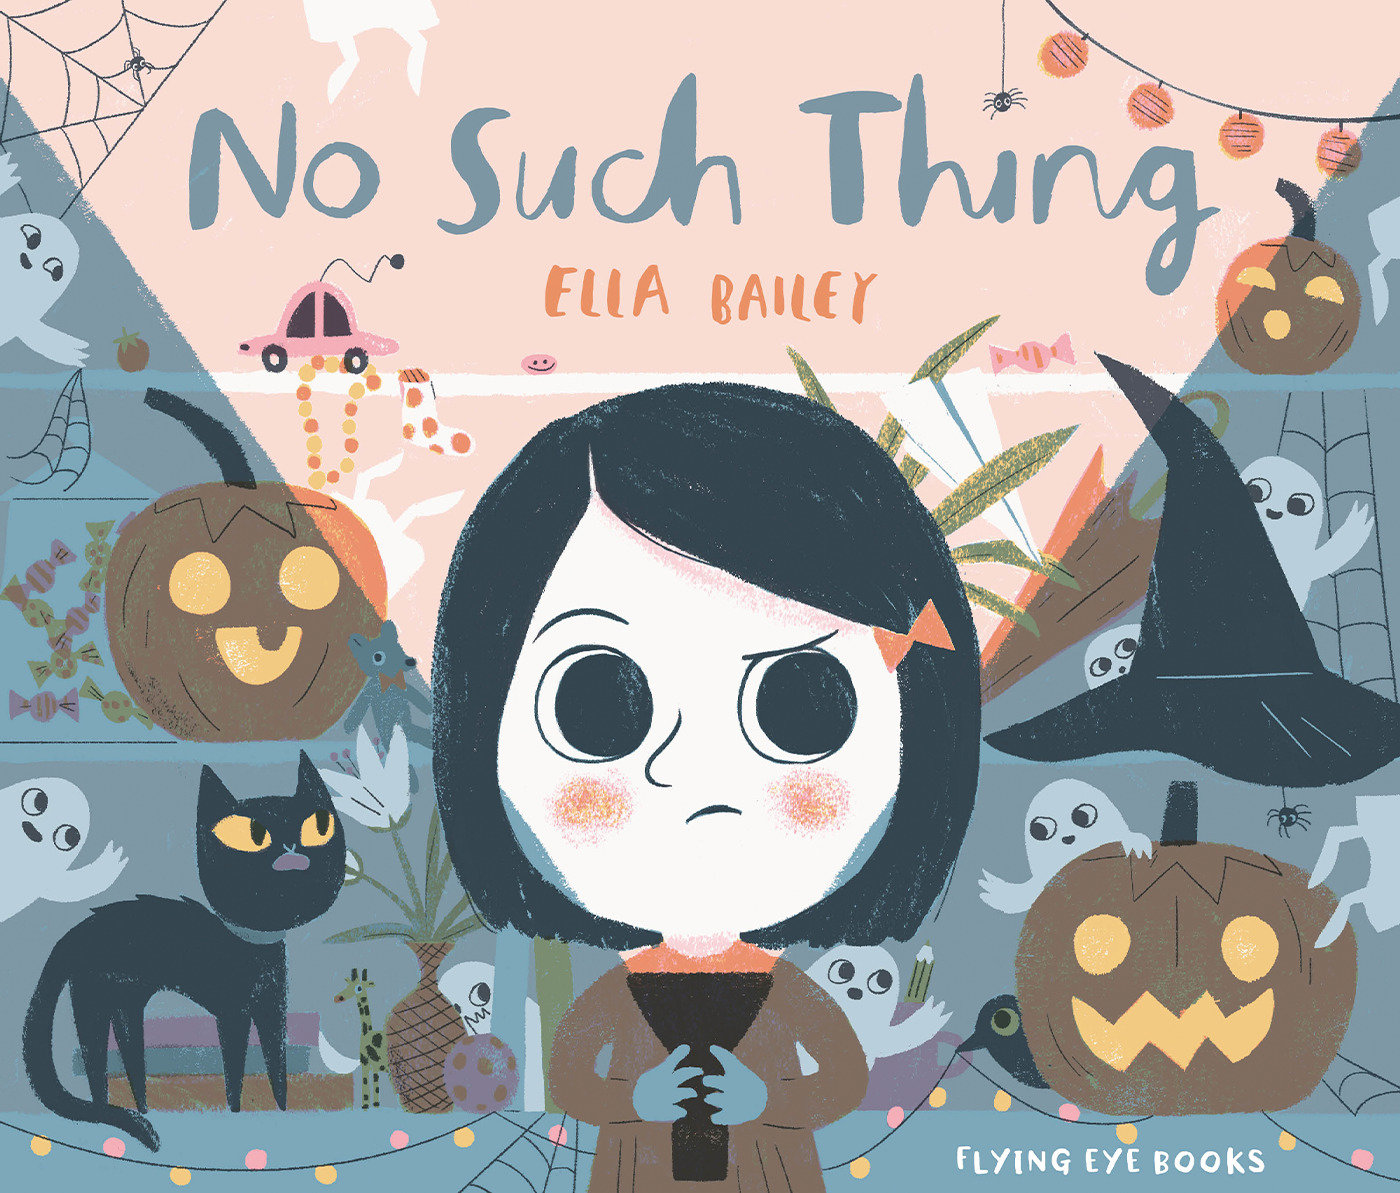 No Such Thing (Hardcover Book)